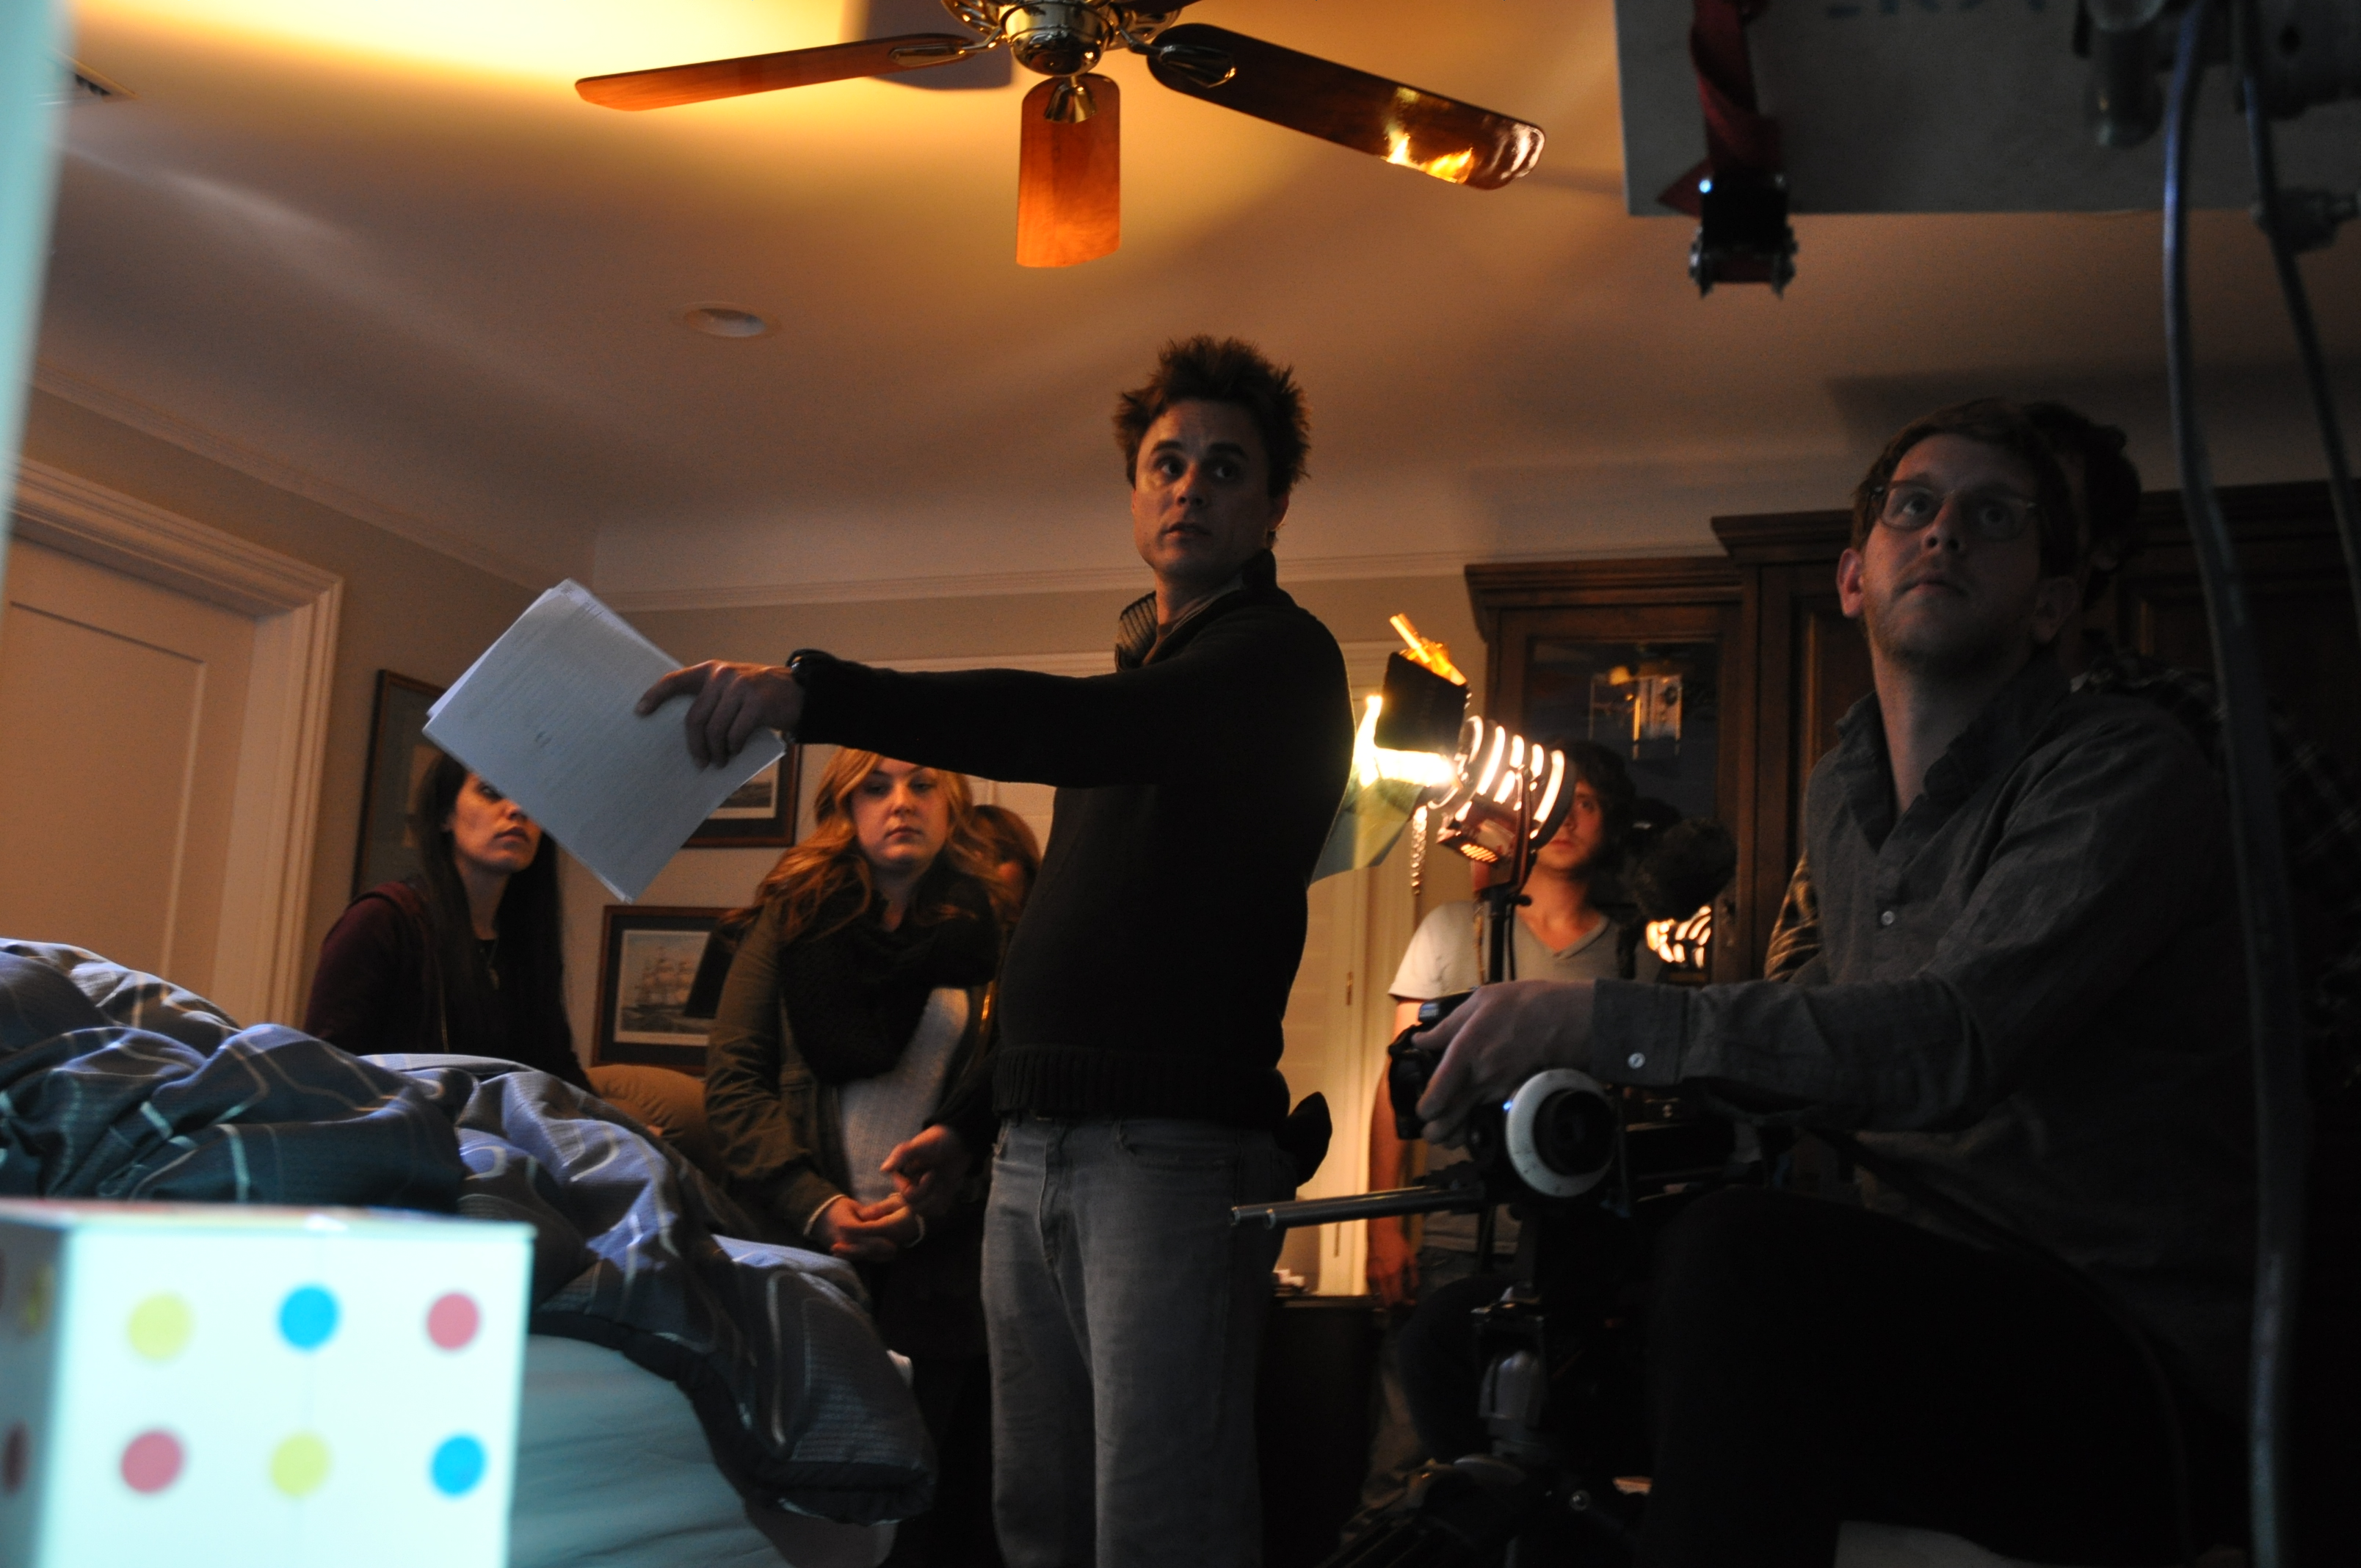 Producer Danielle Loo, Production Designer Maddie McVey, Director Bryce Mouer and Director of Photography Nate Lipp prepare to shoot a scene from GENRE.